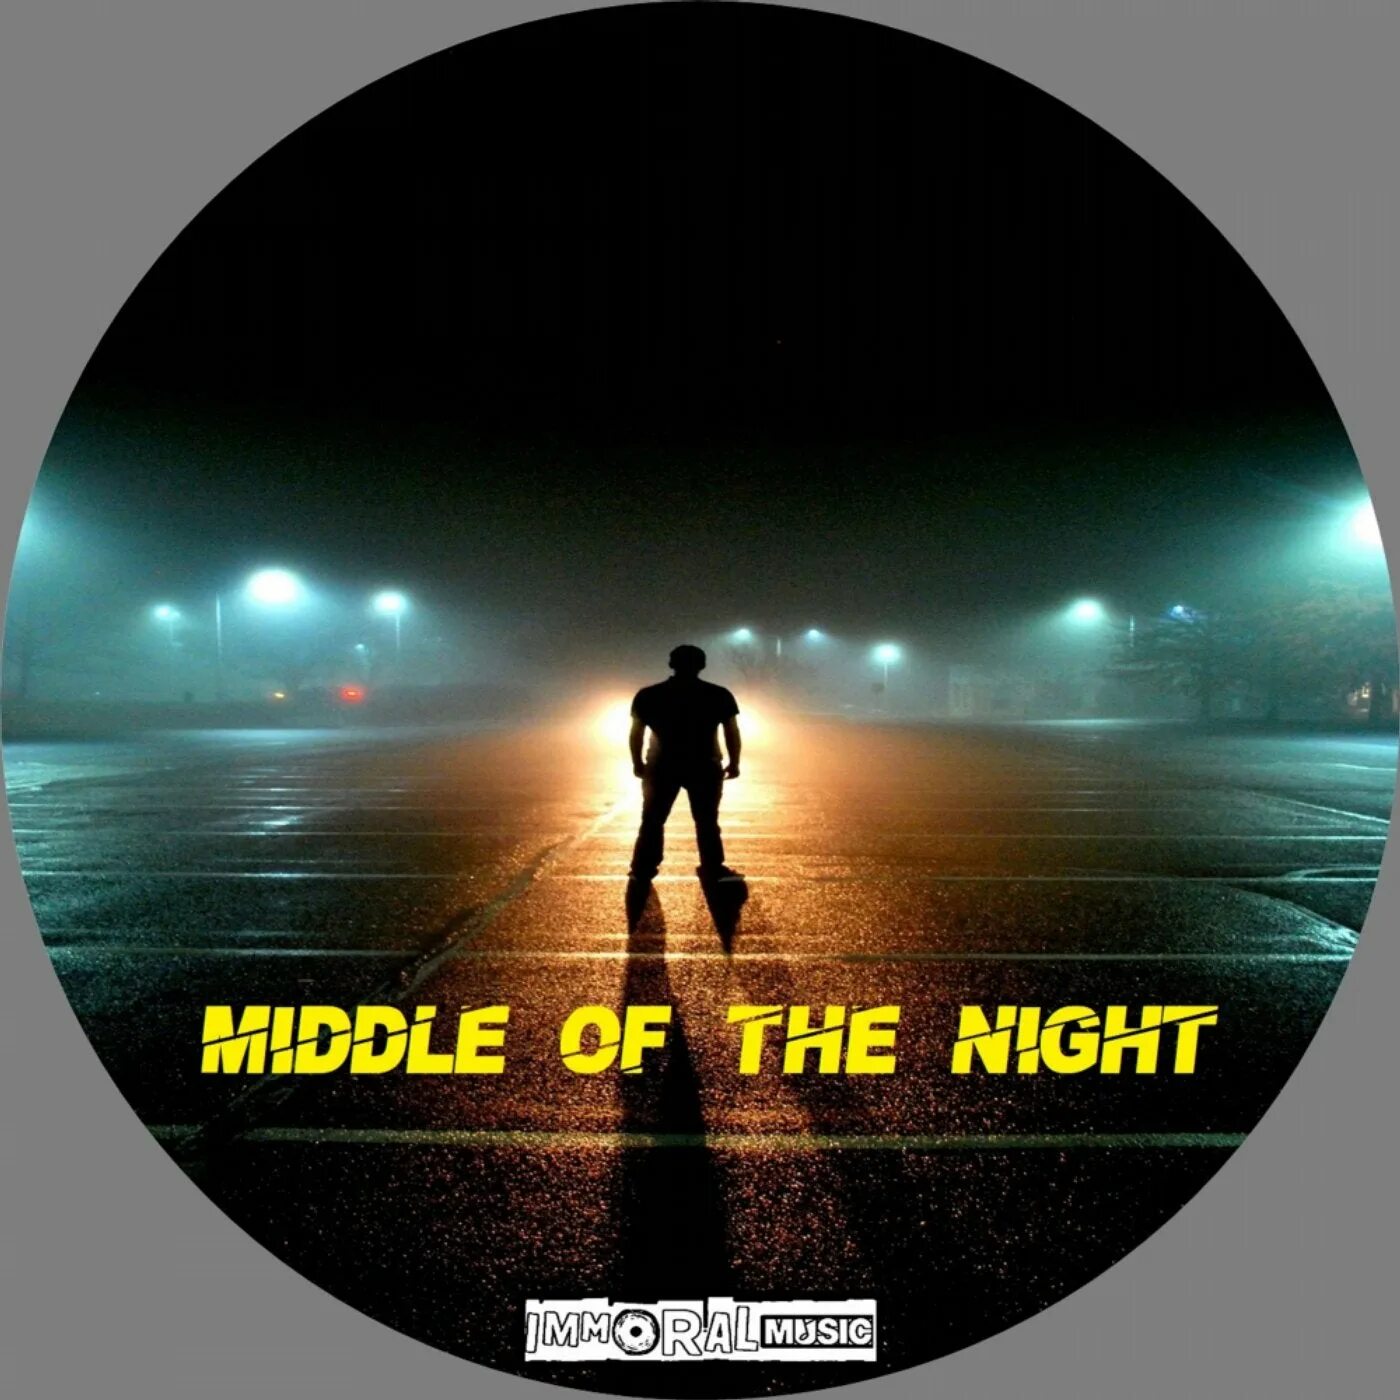 Middle of the Night. Middle of the Night обложка. Обложка песни Middle of the Night. In the Middle of the Night картинки. Песня middle of the night elley